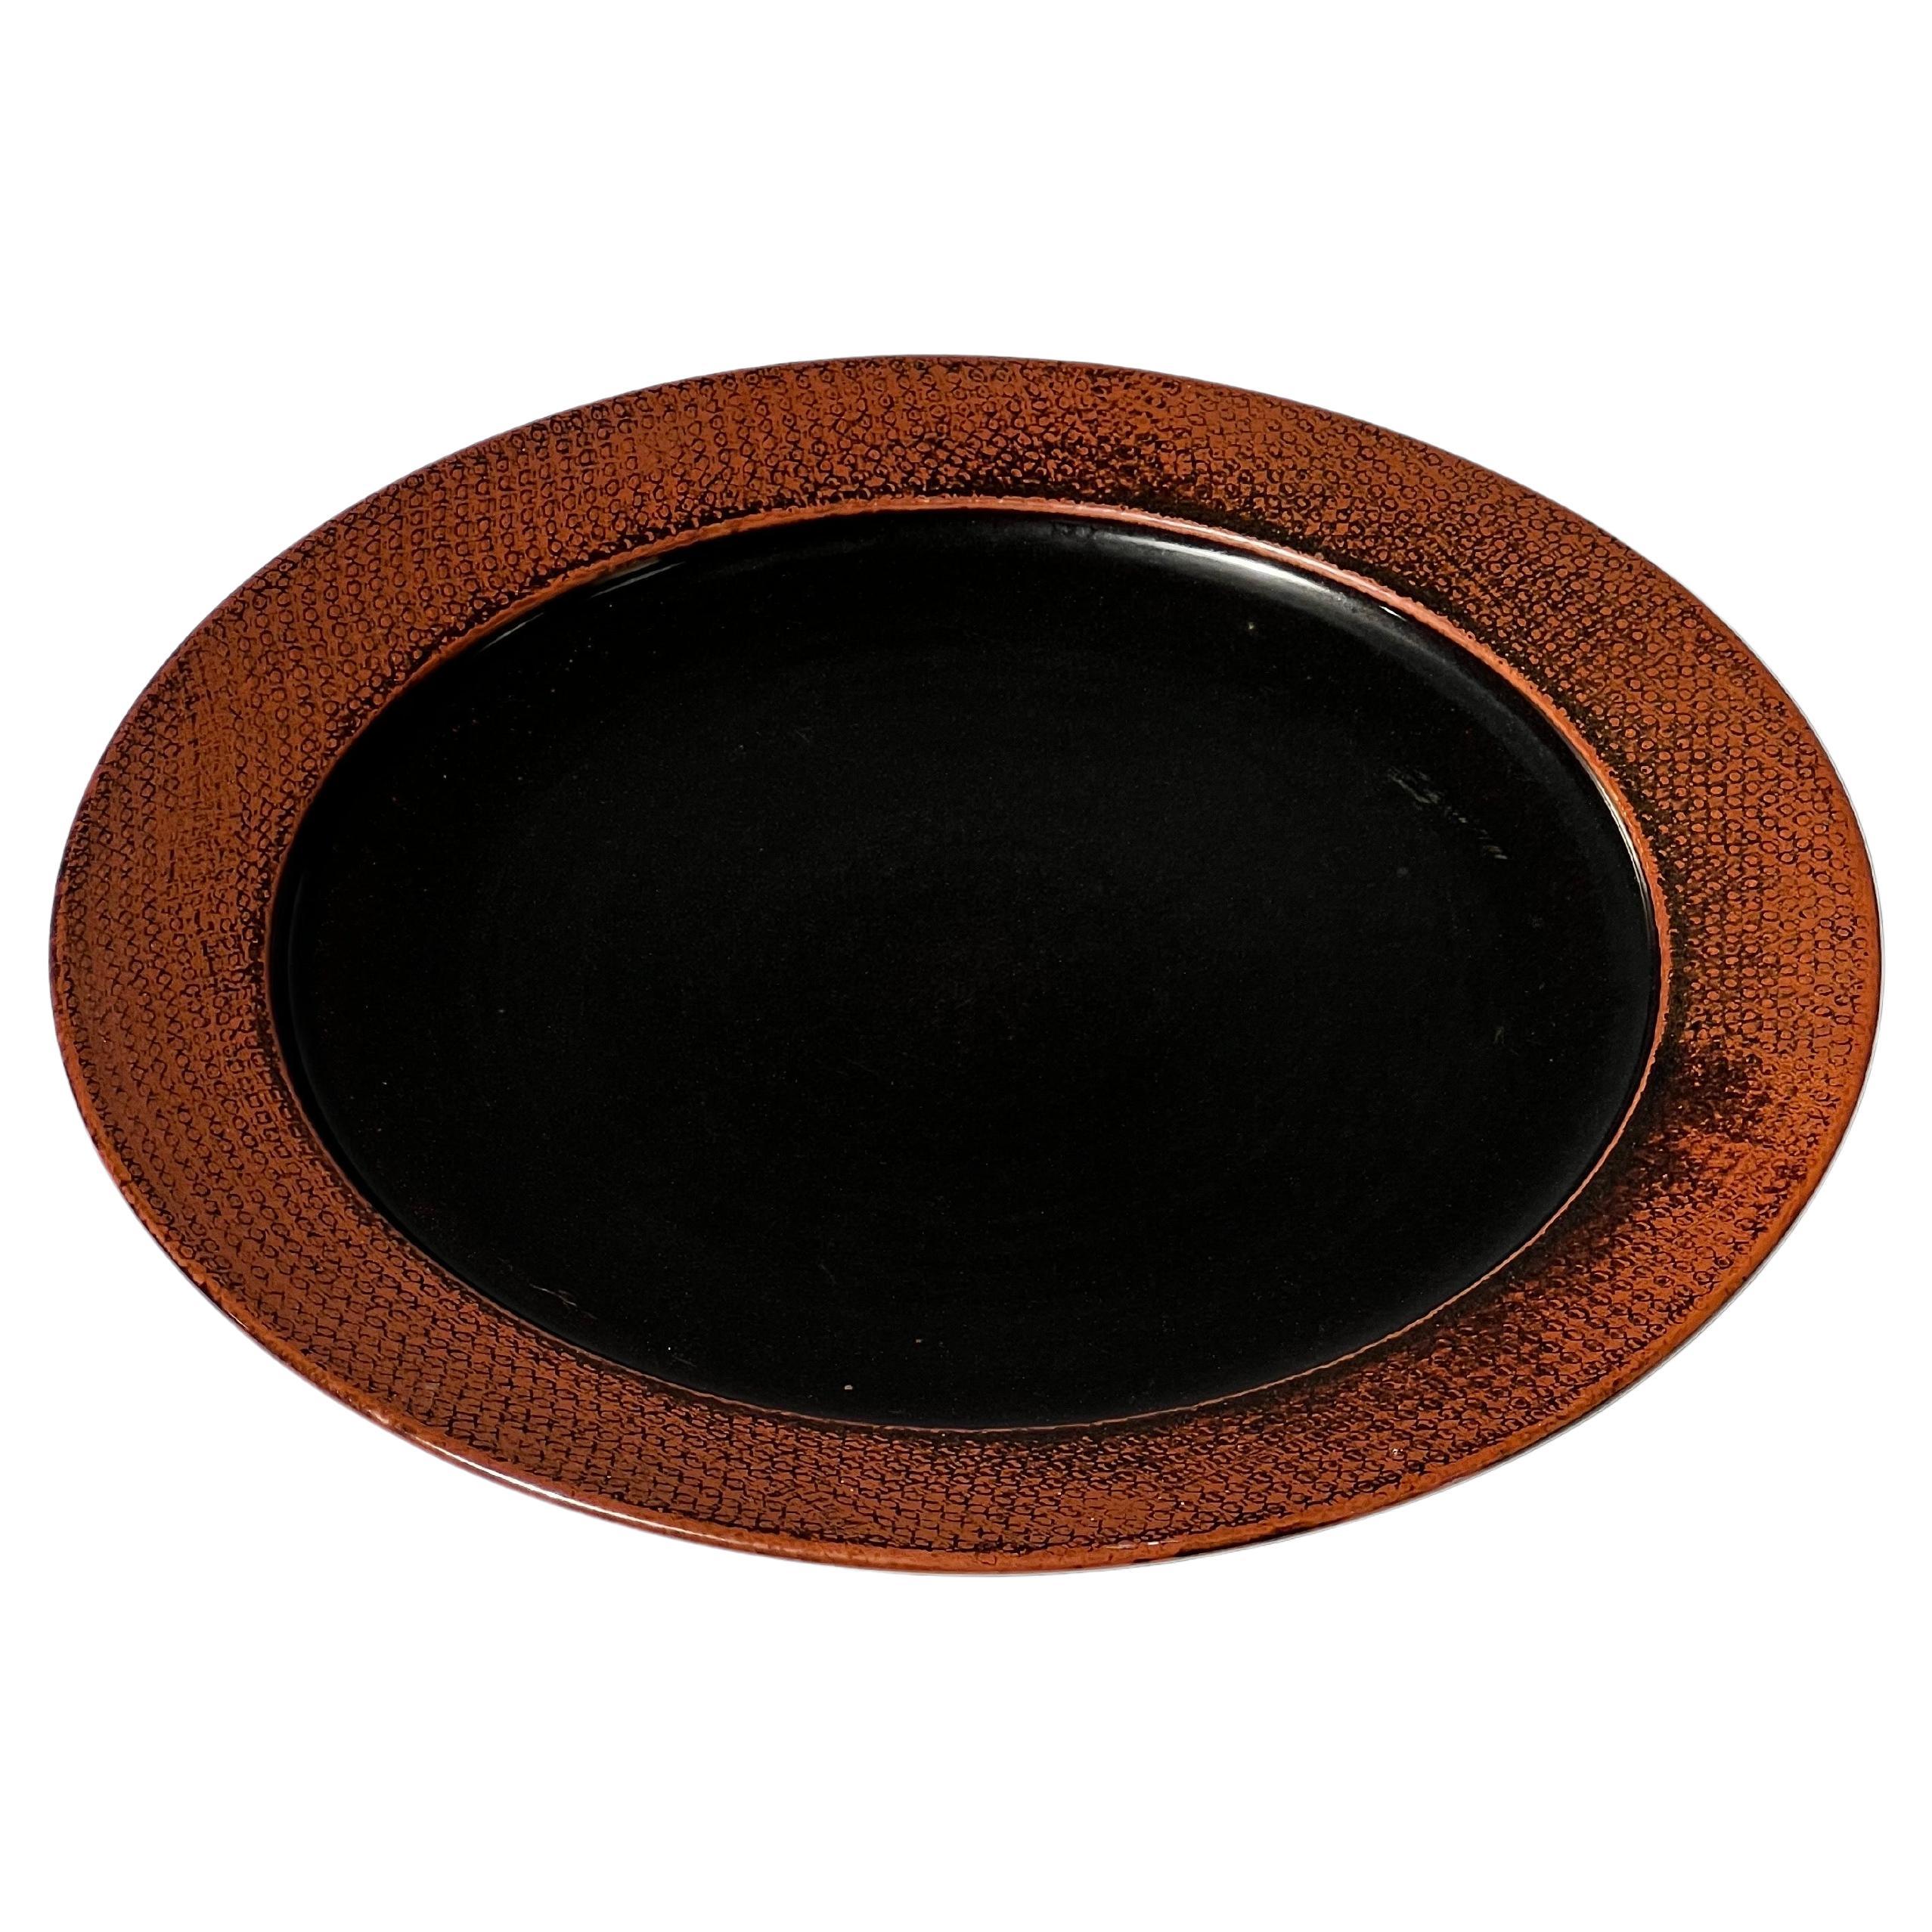 Stig Lindberg Unique Tray in black Glaze Tenmoku Made by Hand Sweden 1973 For Sale